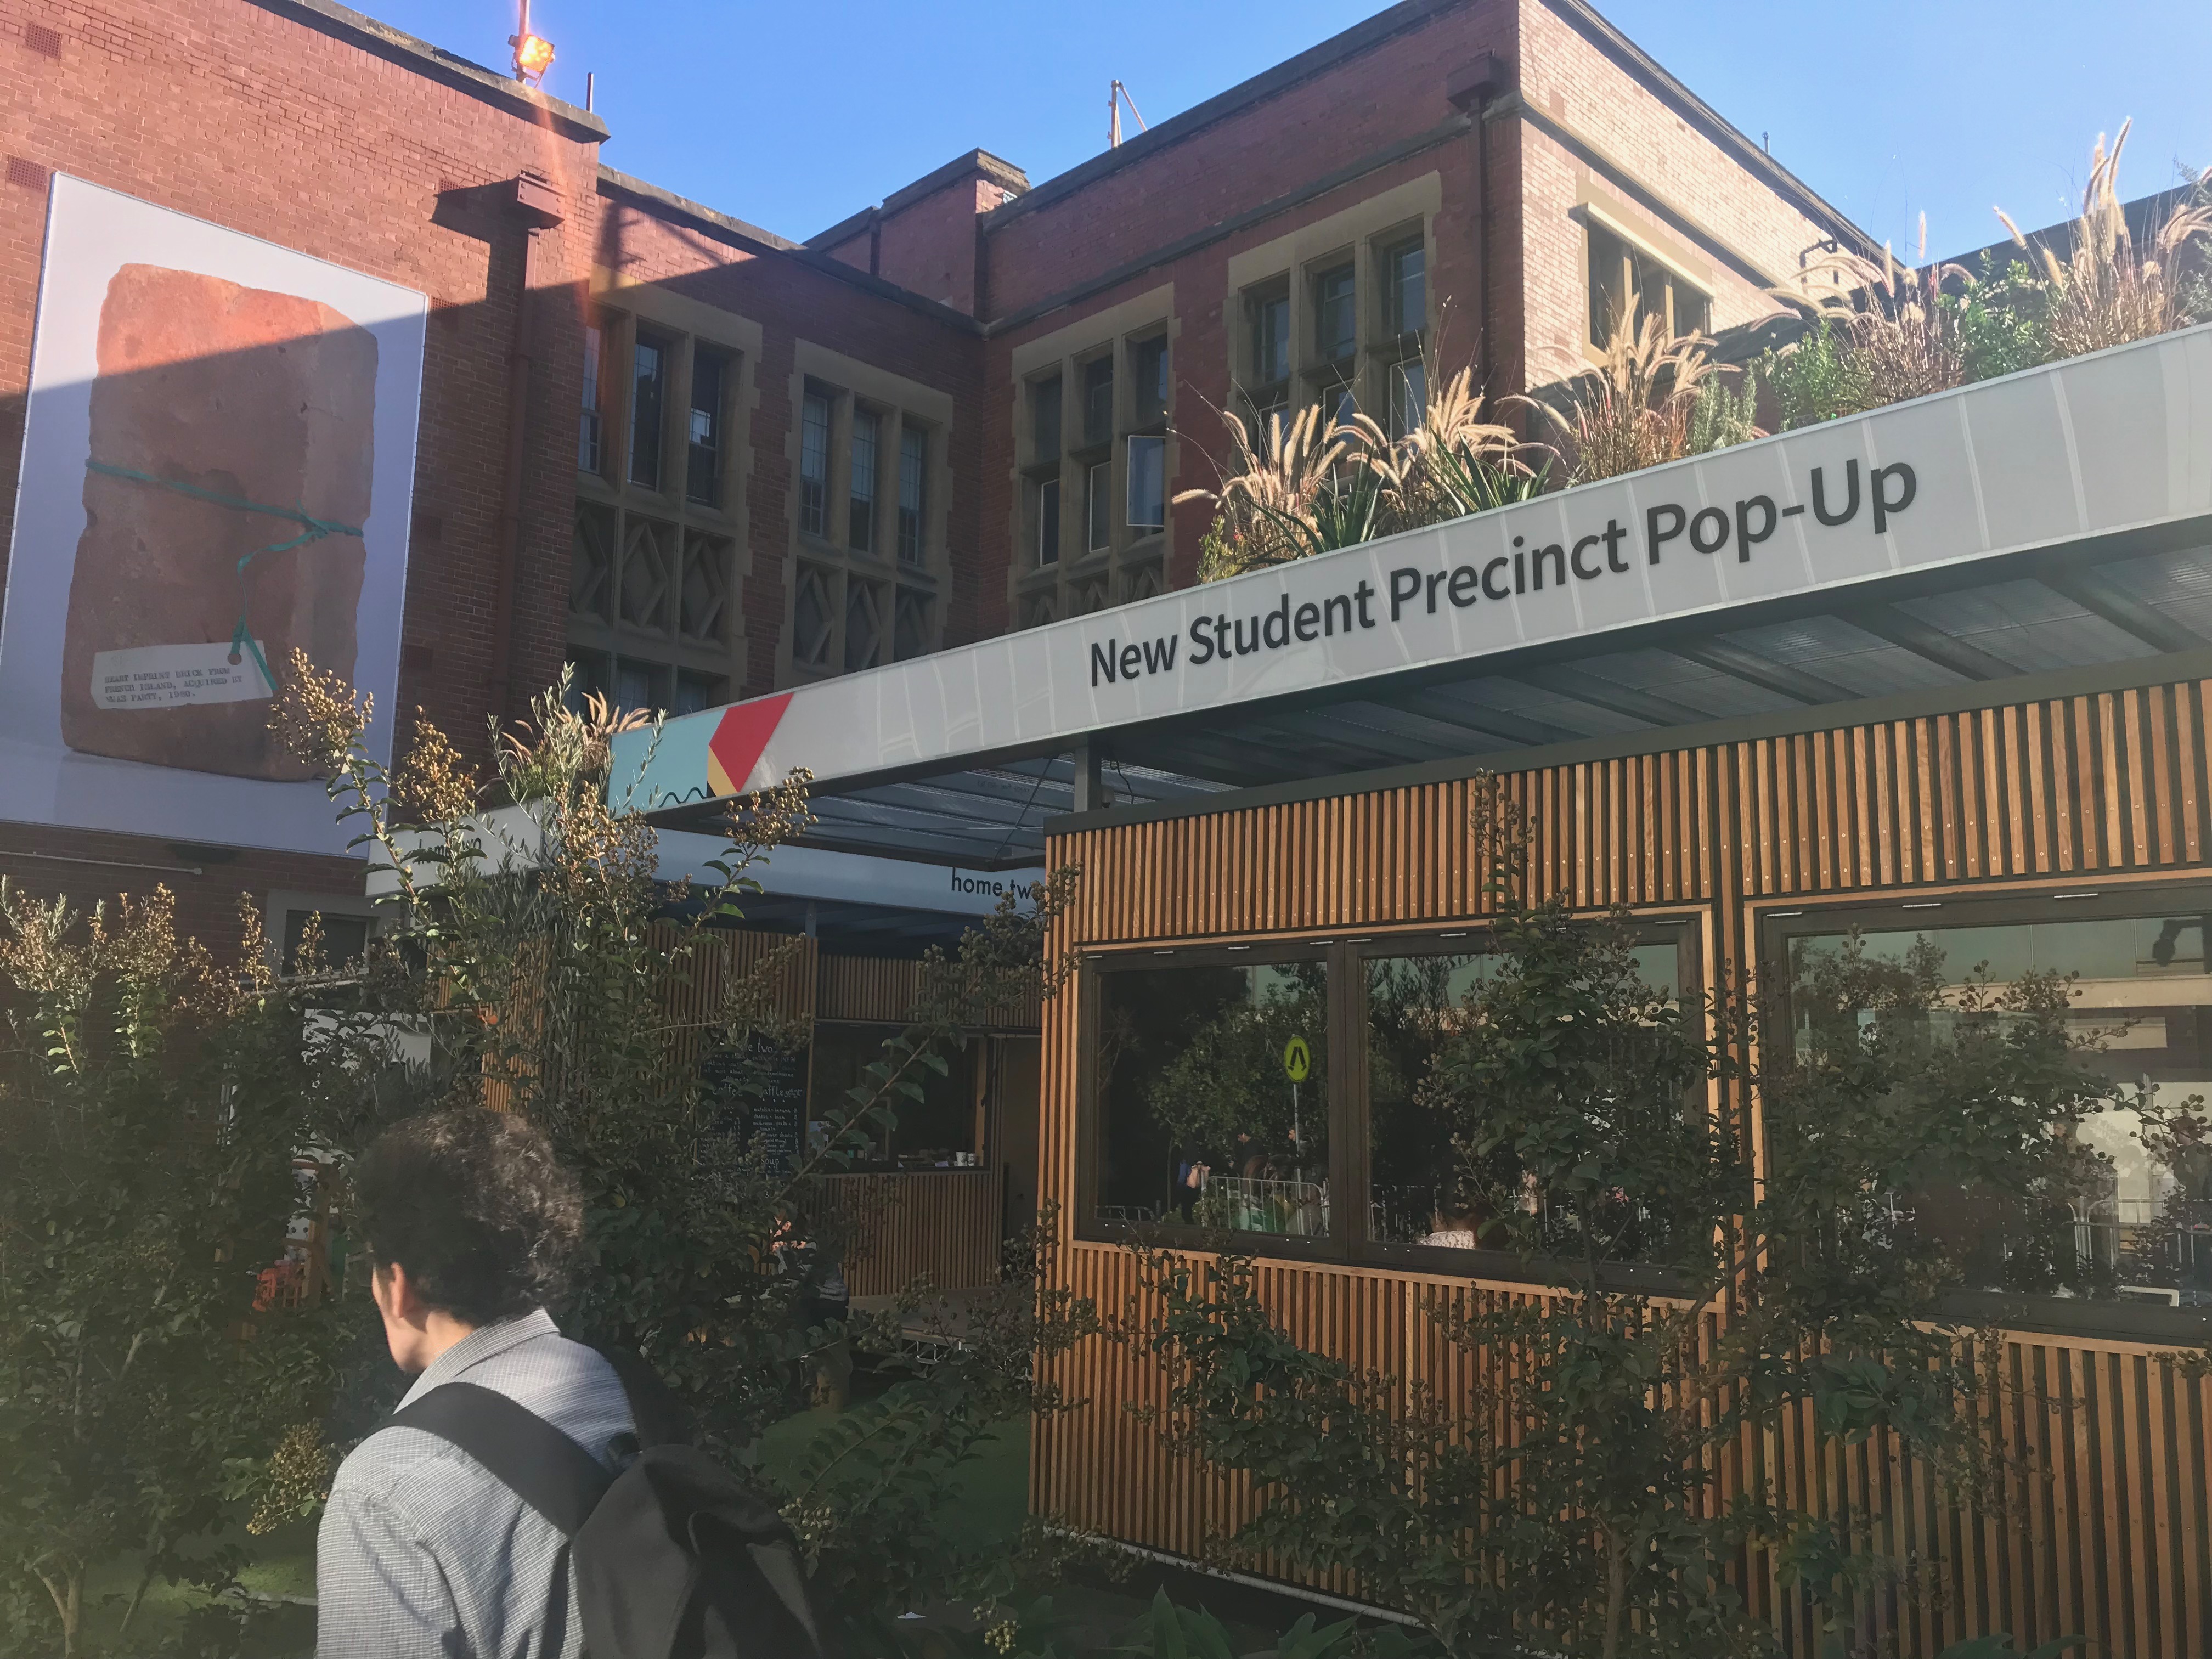 An outdoor study pod at the Mon-Pop site. The pod is a large, rectangular struture, covered in green grasses and made of hard, deep brown wood. A white sign above the structure reads "New Student Precinct Pop-Up. A student in a grey hoodie is walking by the structure